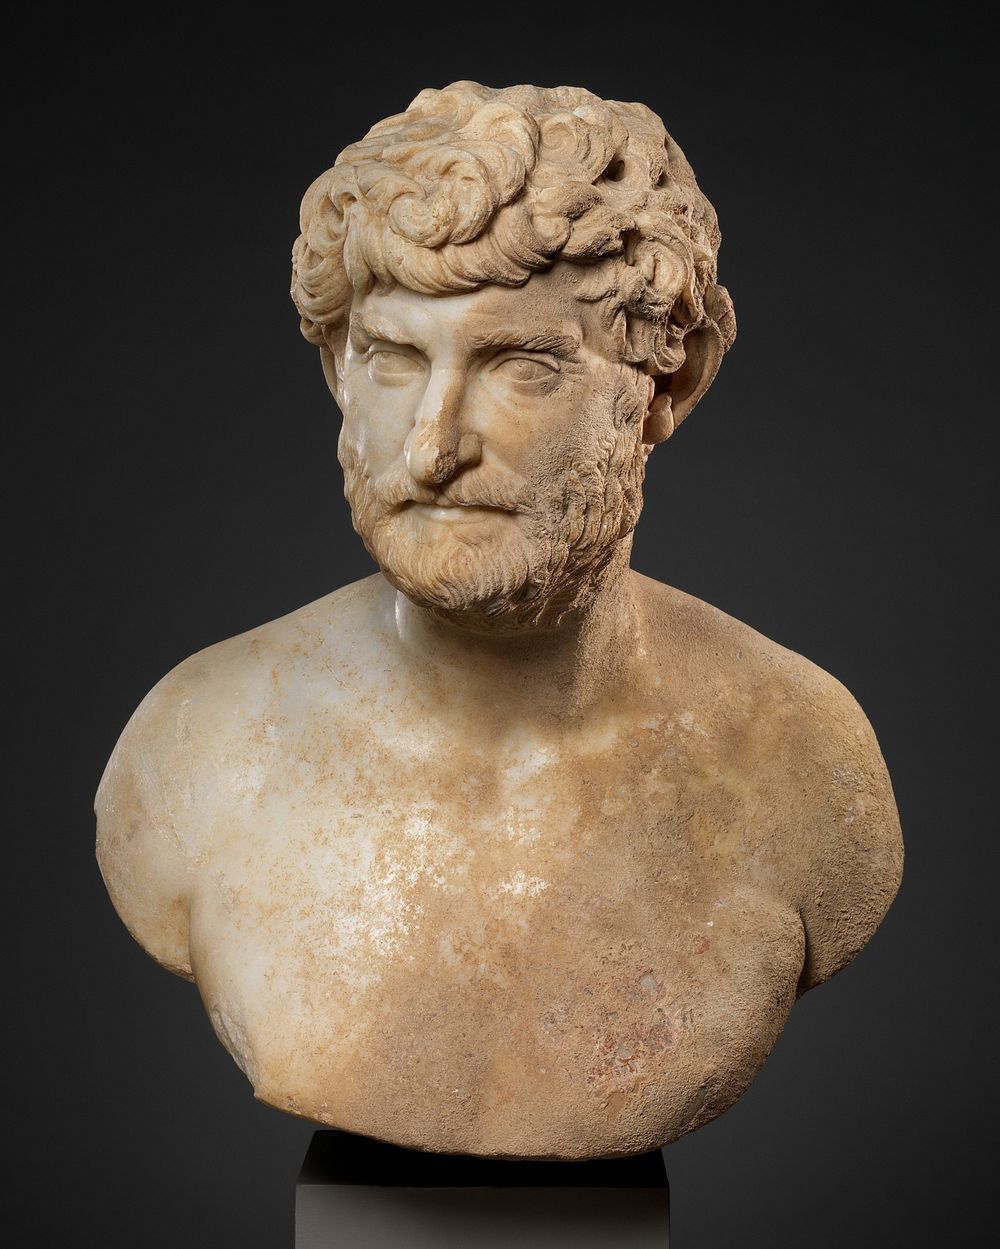 Marble bust of a bearded man